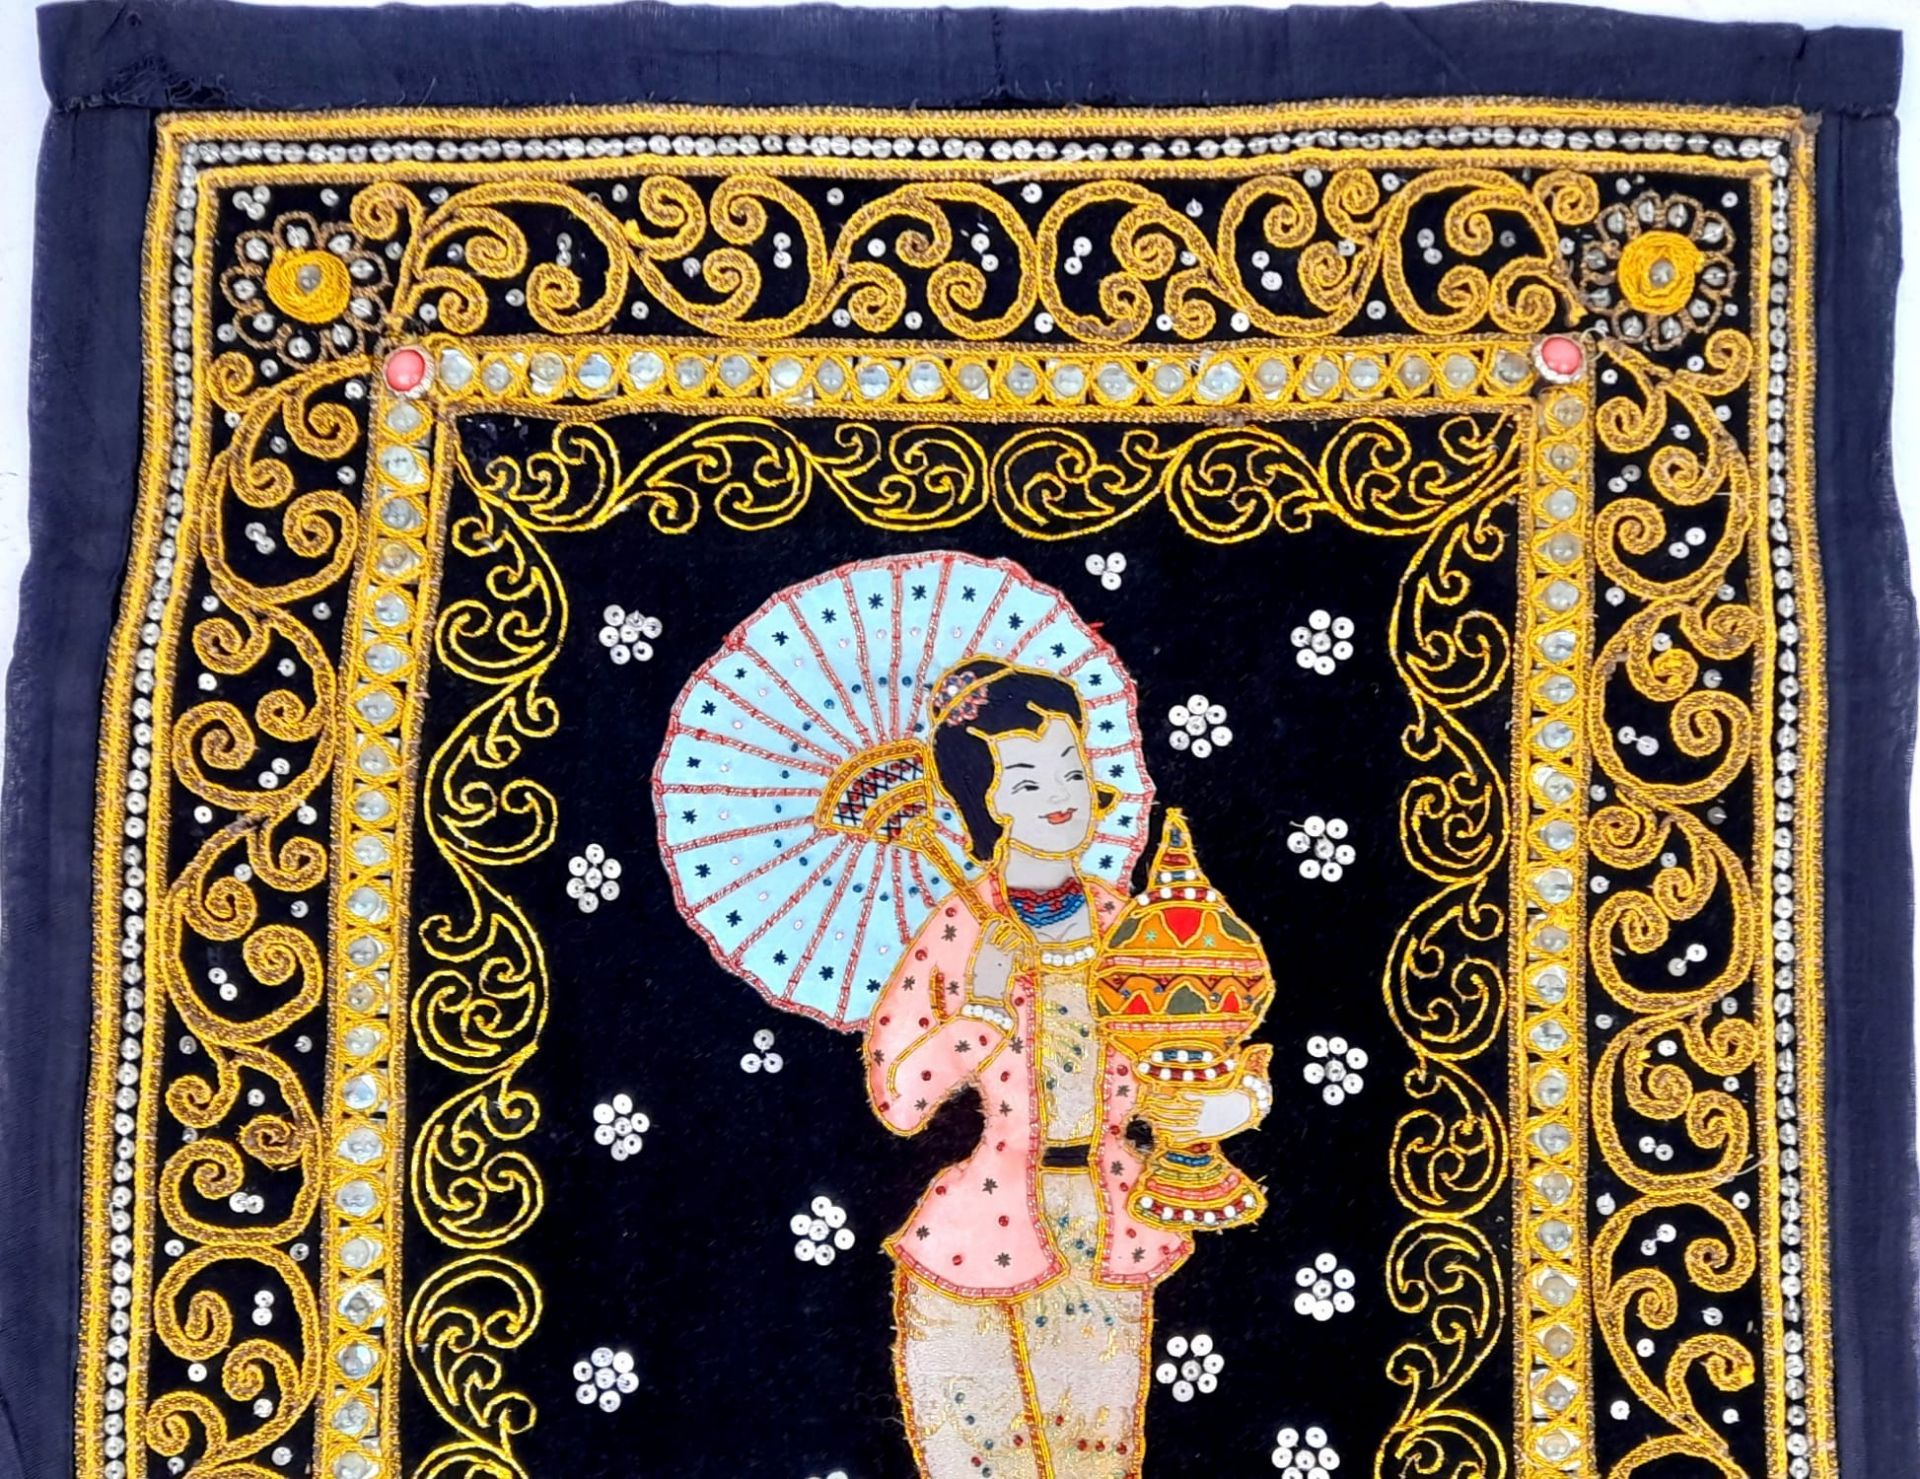 A Vintage Possibly Antique Burmese Hand-Made Embroidery. 62 x 46 cm. - Image 2 of 3